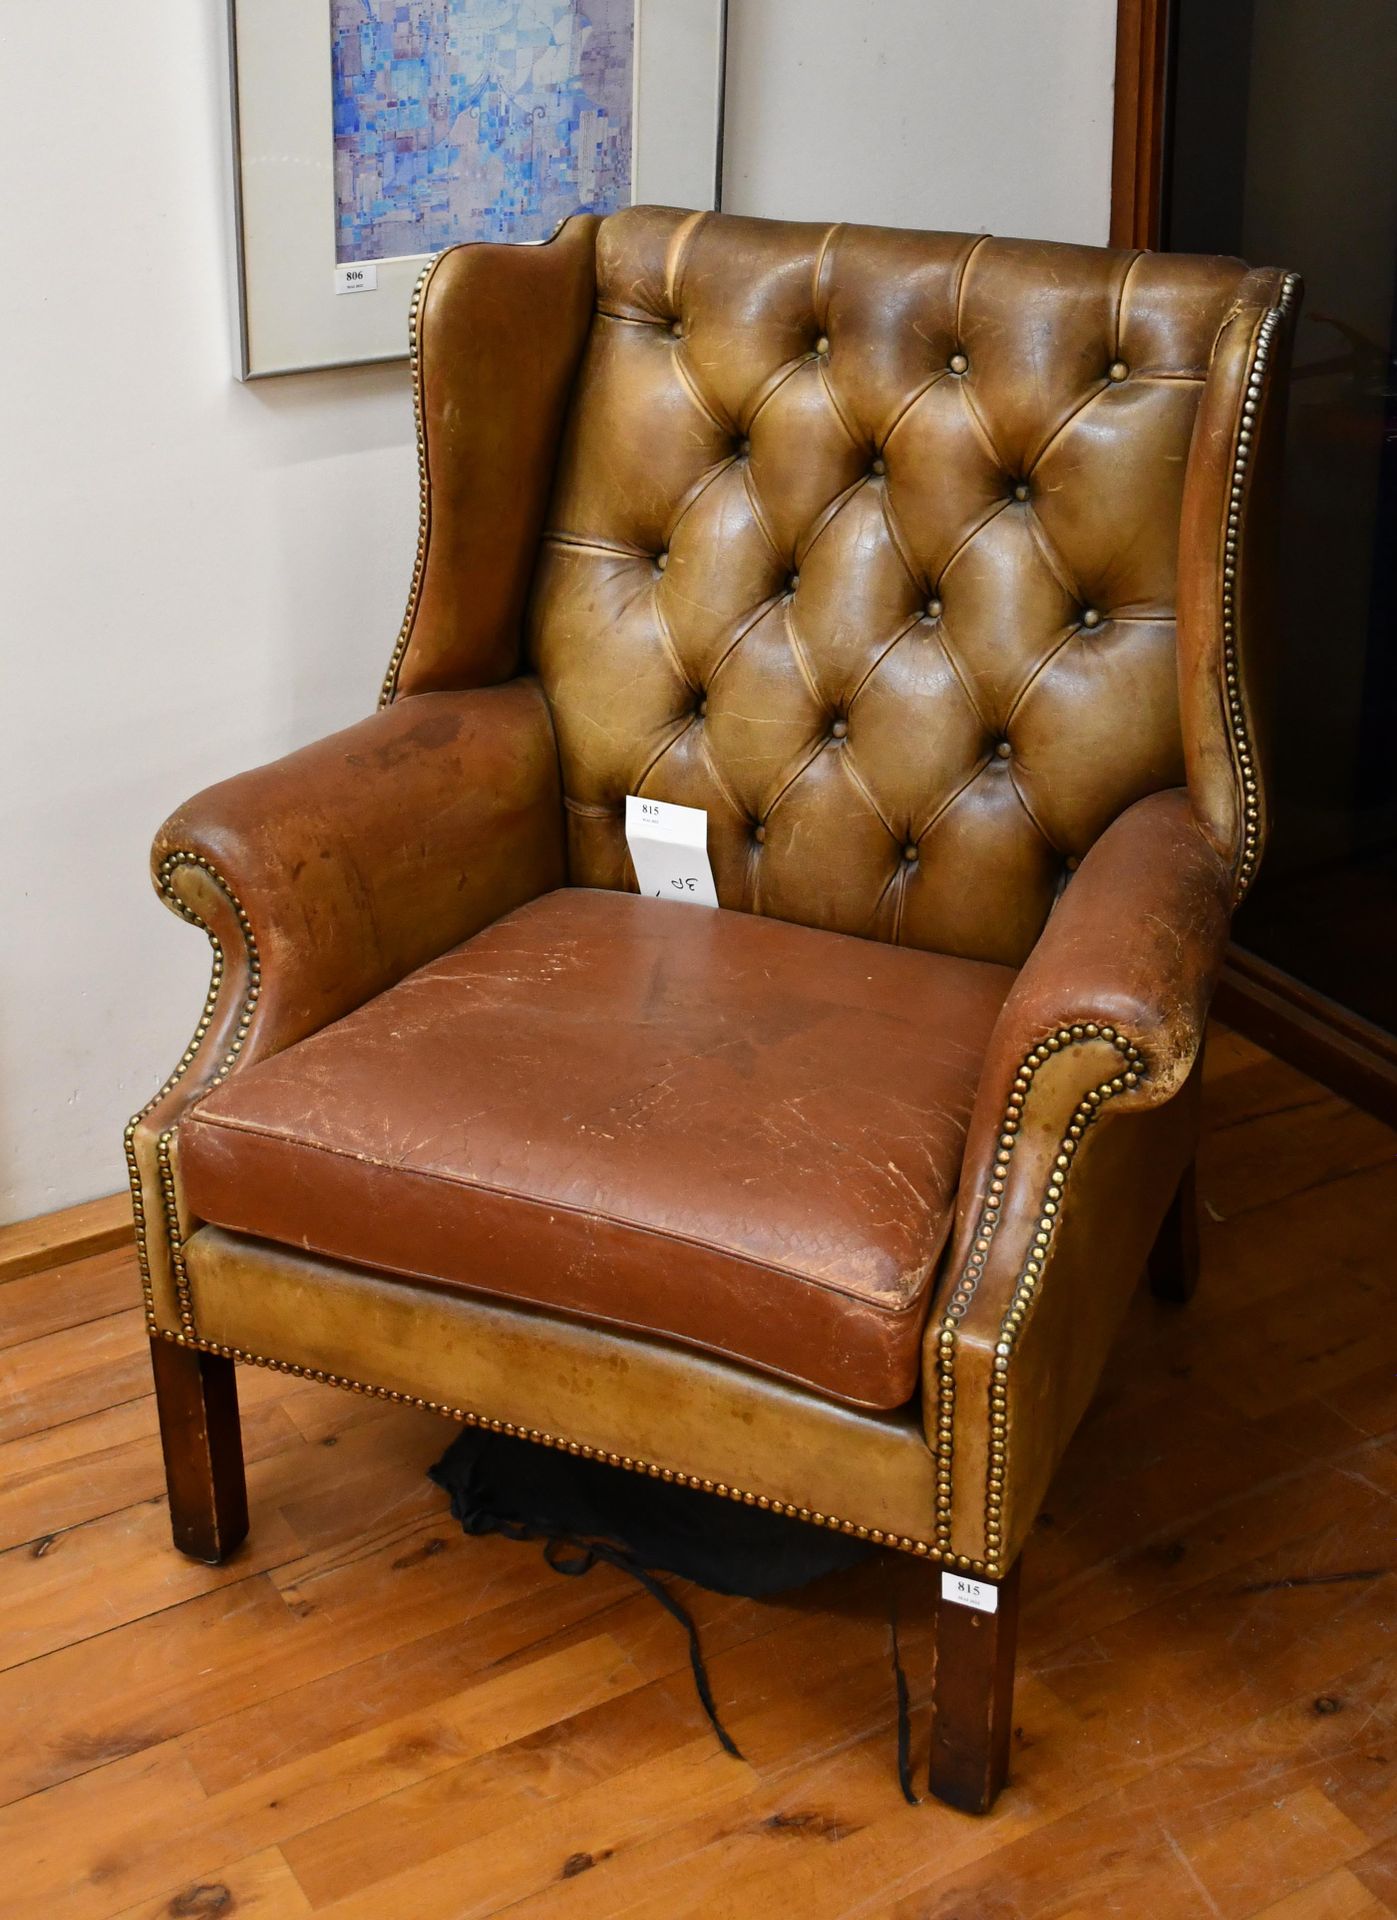 Null Upholstered leather shepherd's chair with ears - Accident